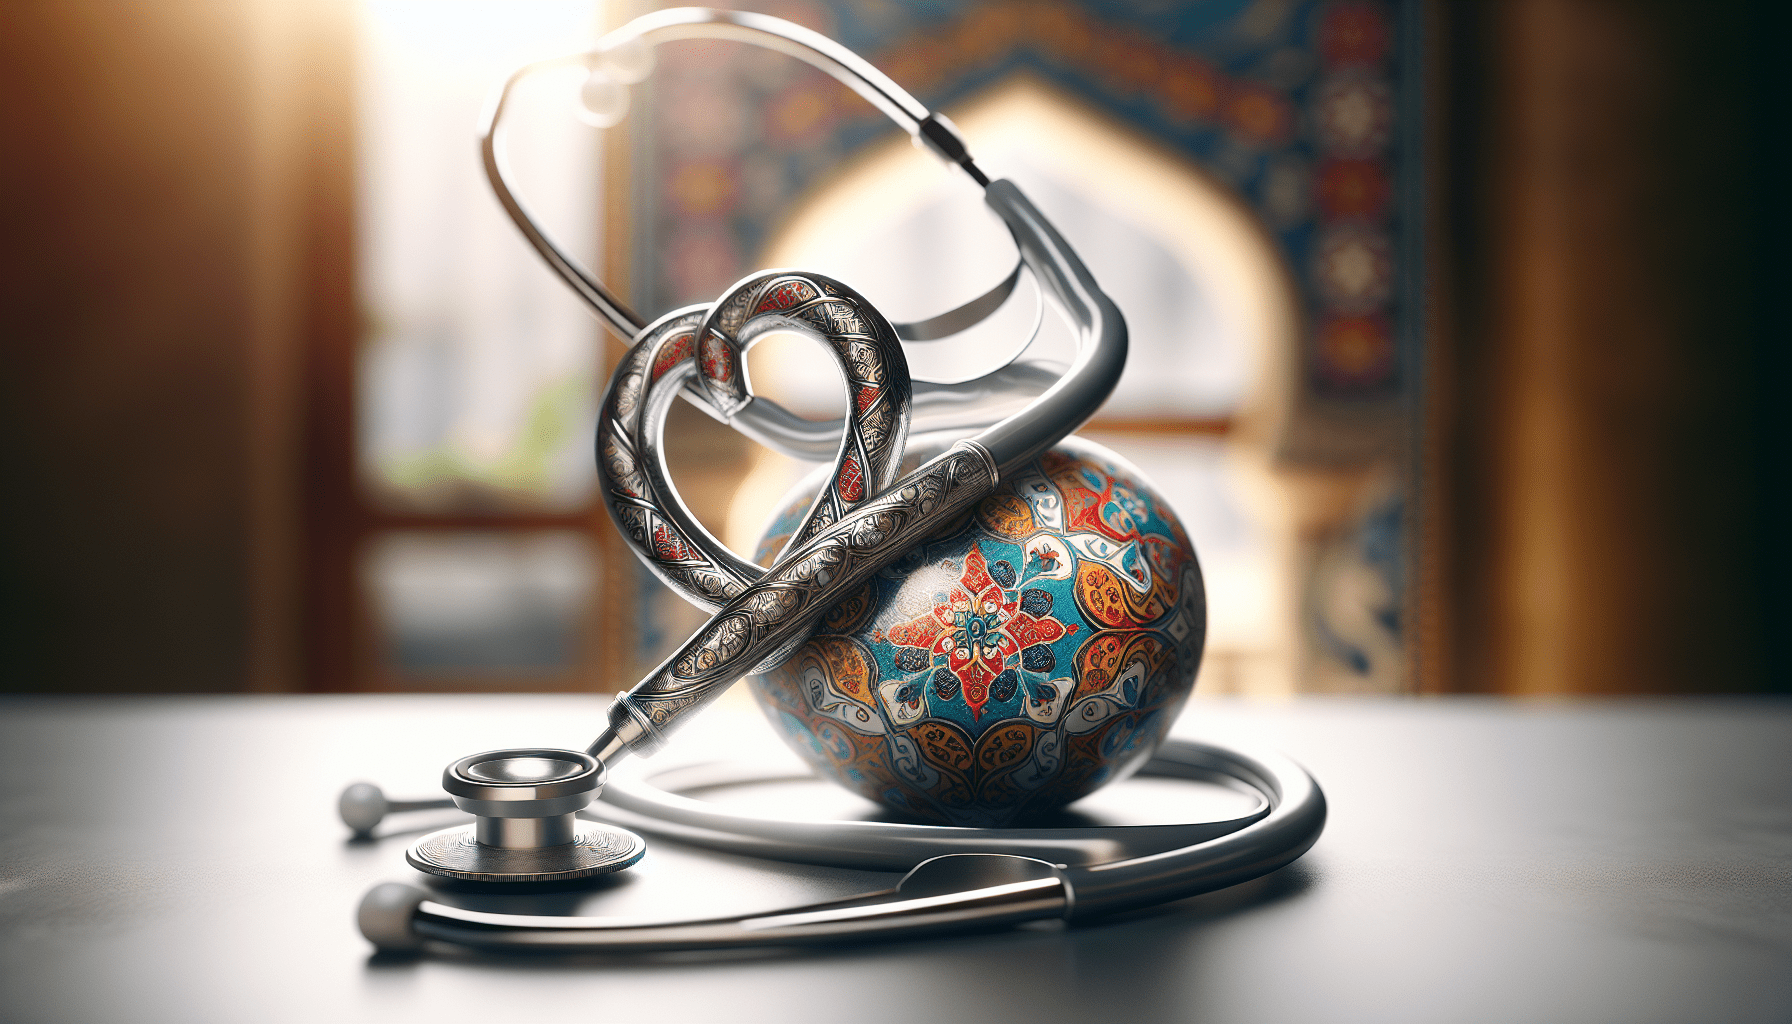 A stethoscope and a heart-shaped ornament with intricate designs on a reflective surface, suggesting a blend of art and medicine.